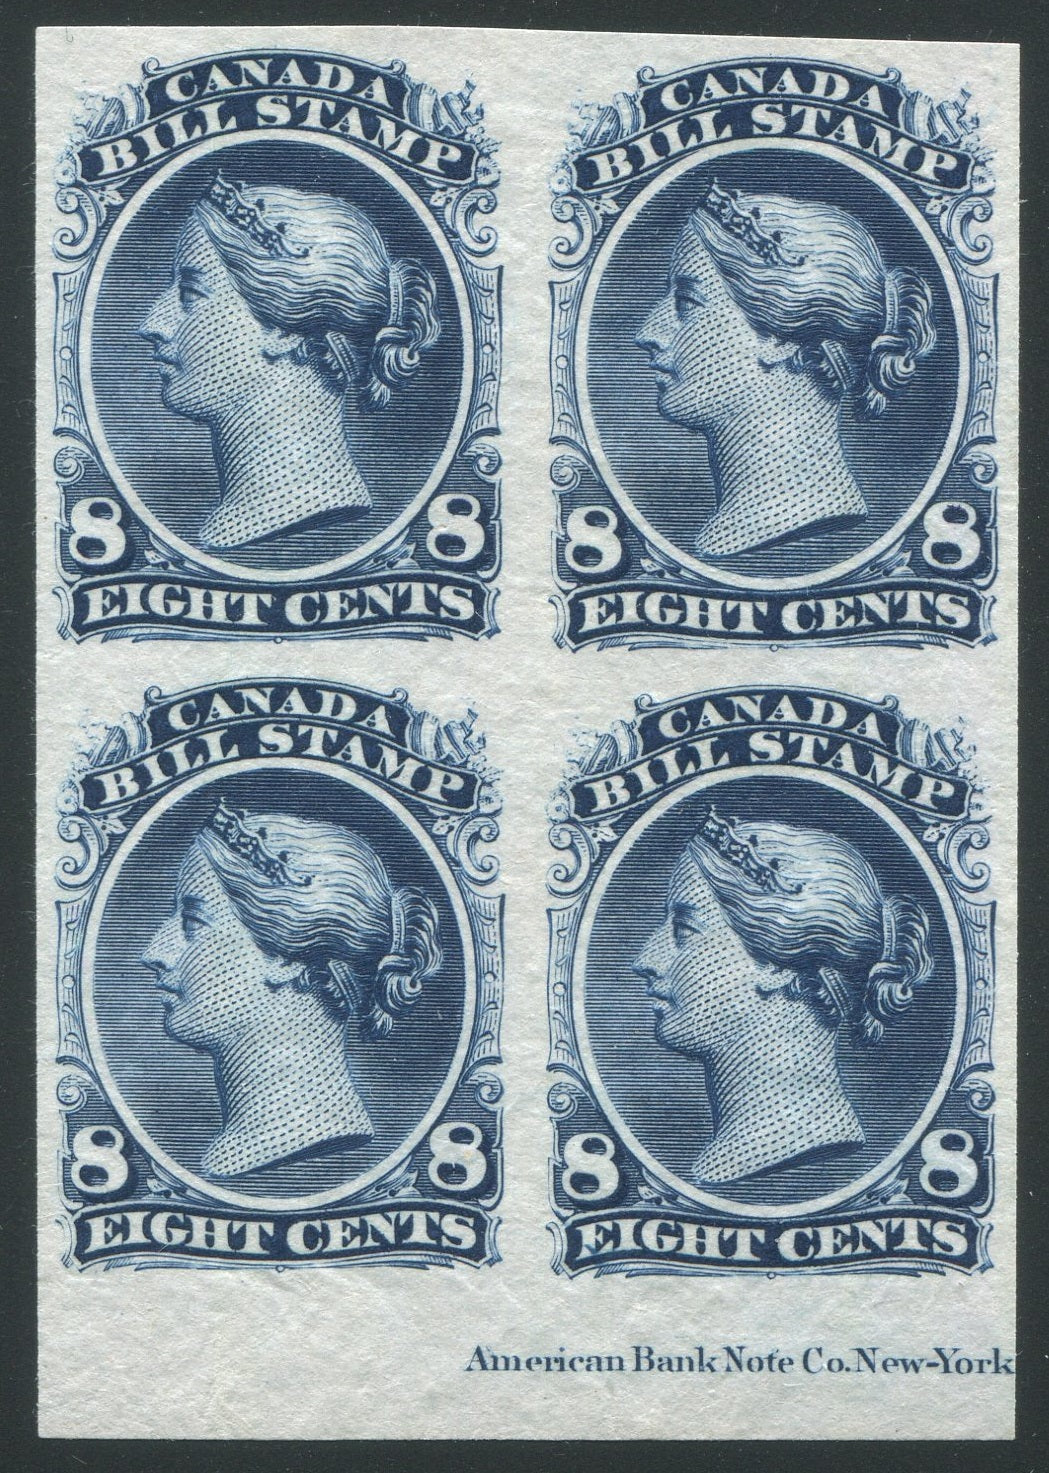 0025FB1910 - FB25 - Trial Colour Plate Proof Block of 4